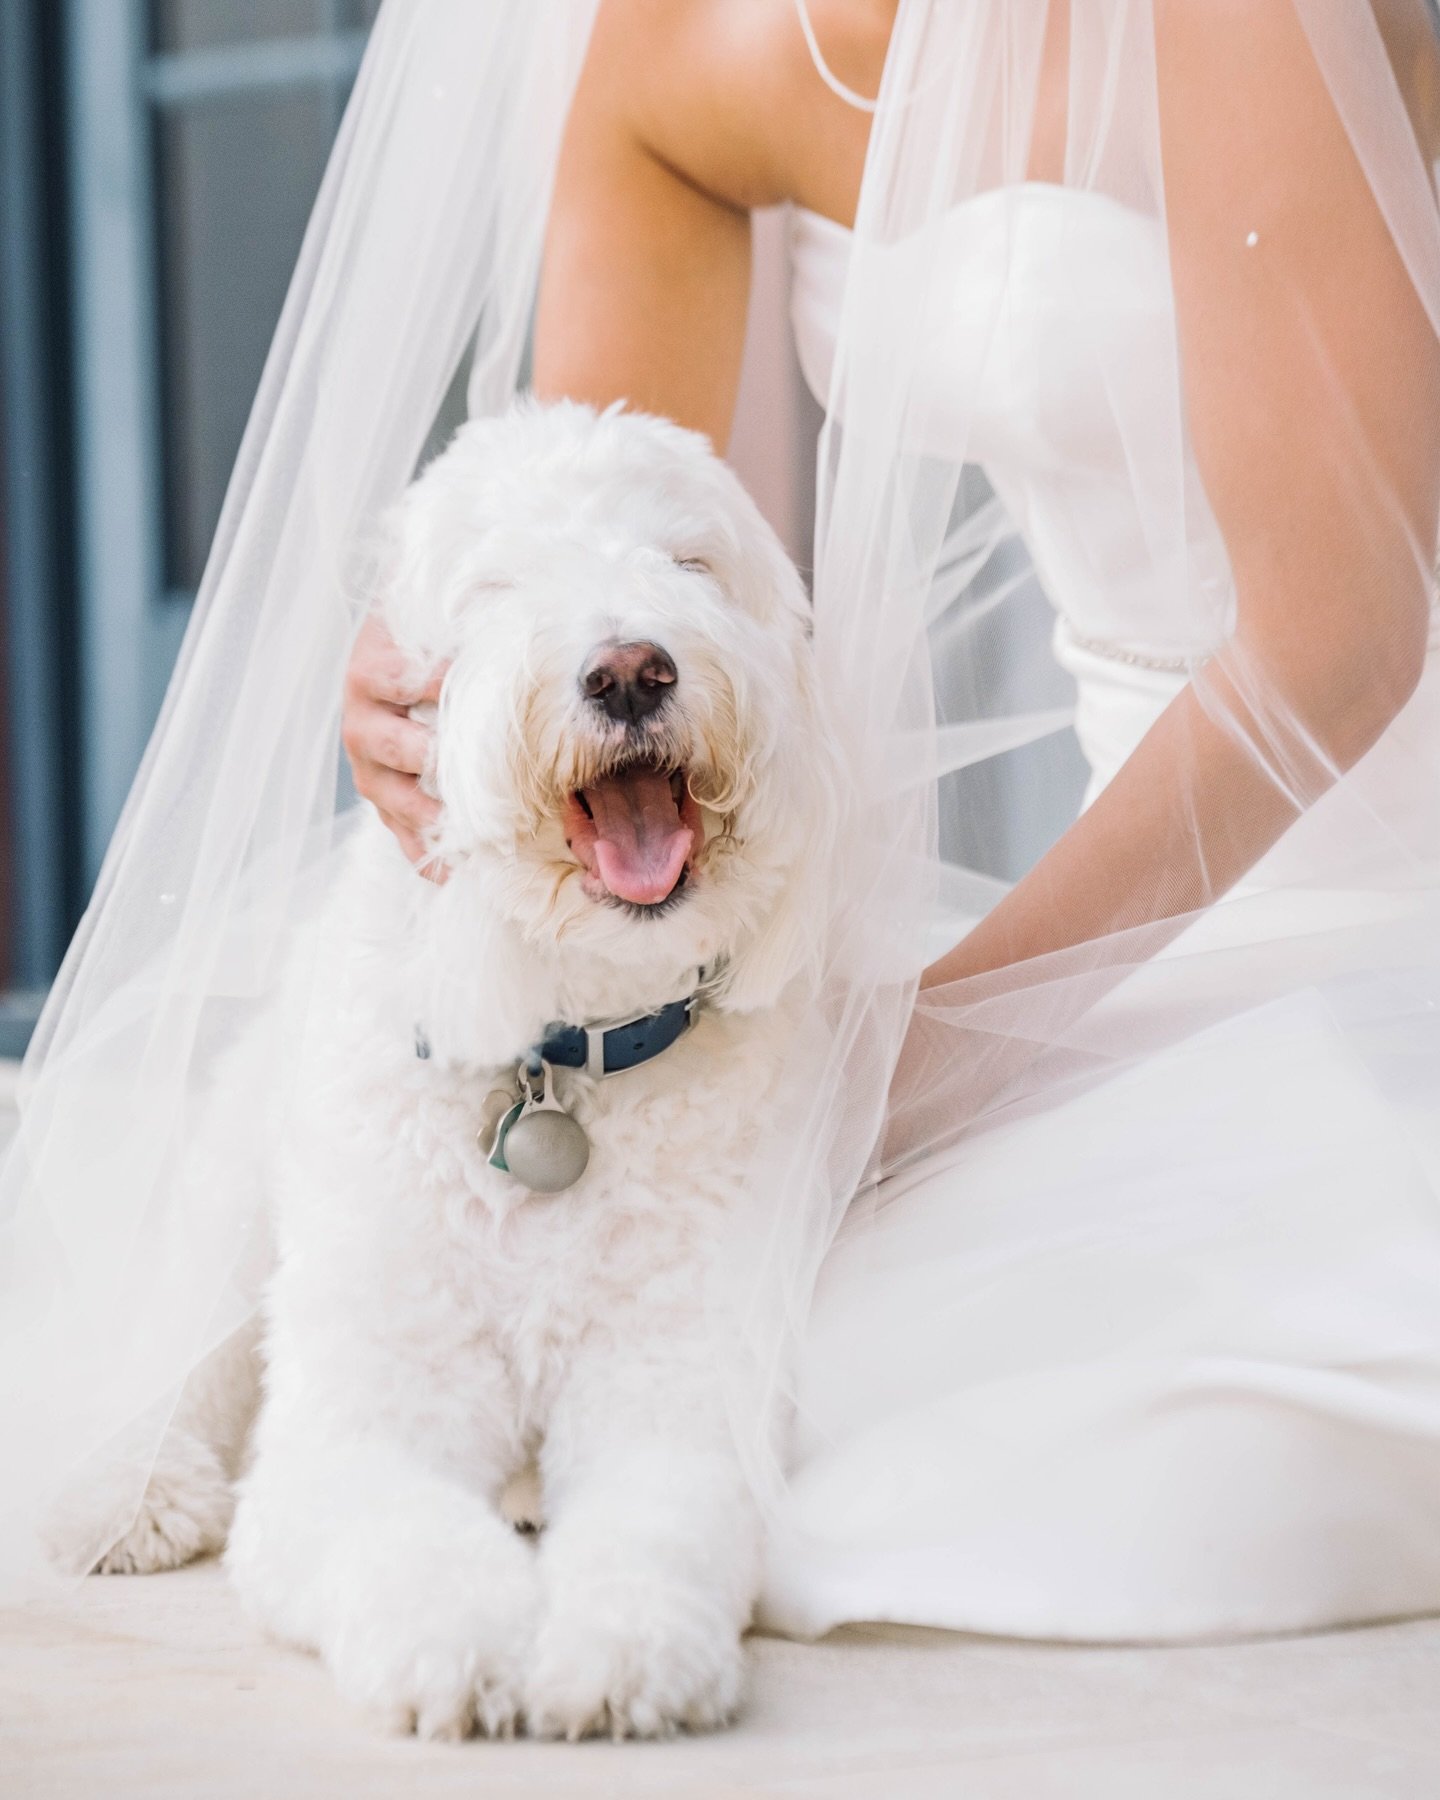 Paws-ing to celebrate National Pet Day!🐶🐾

Planning your big day? Let&rsquo;s elevate it by incorporating your furry friends into your celebration! Whether they&rsquo;re walking down the aisle, or posing for photos, their presence adds an undeniabl